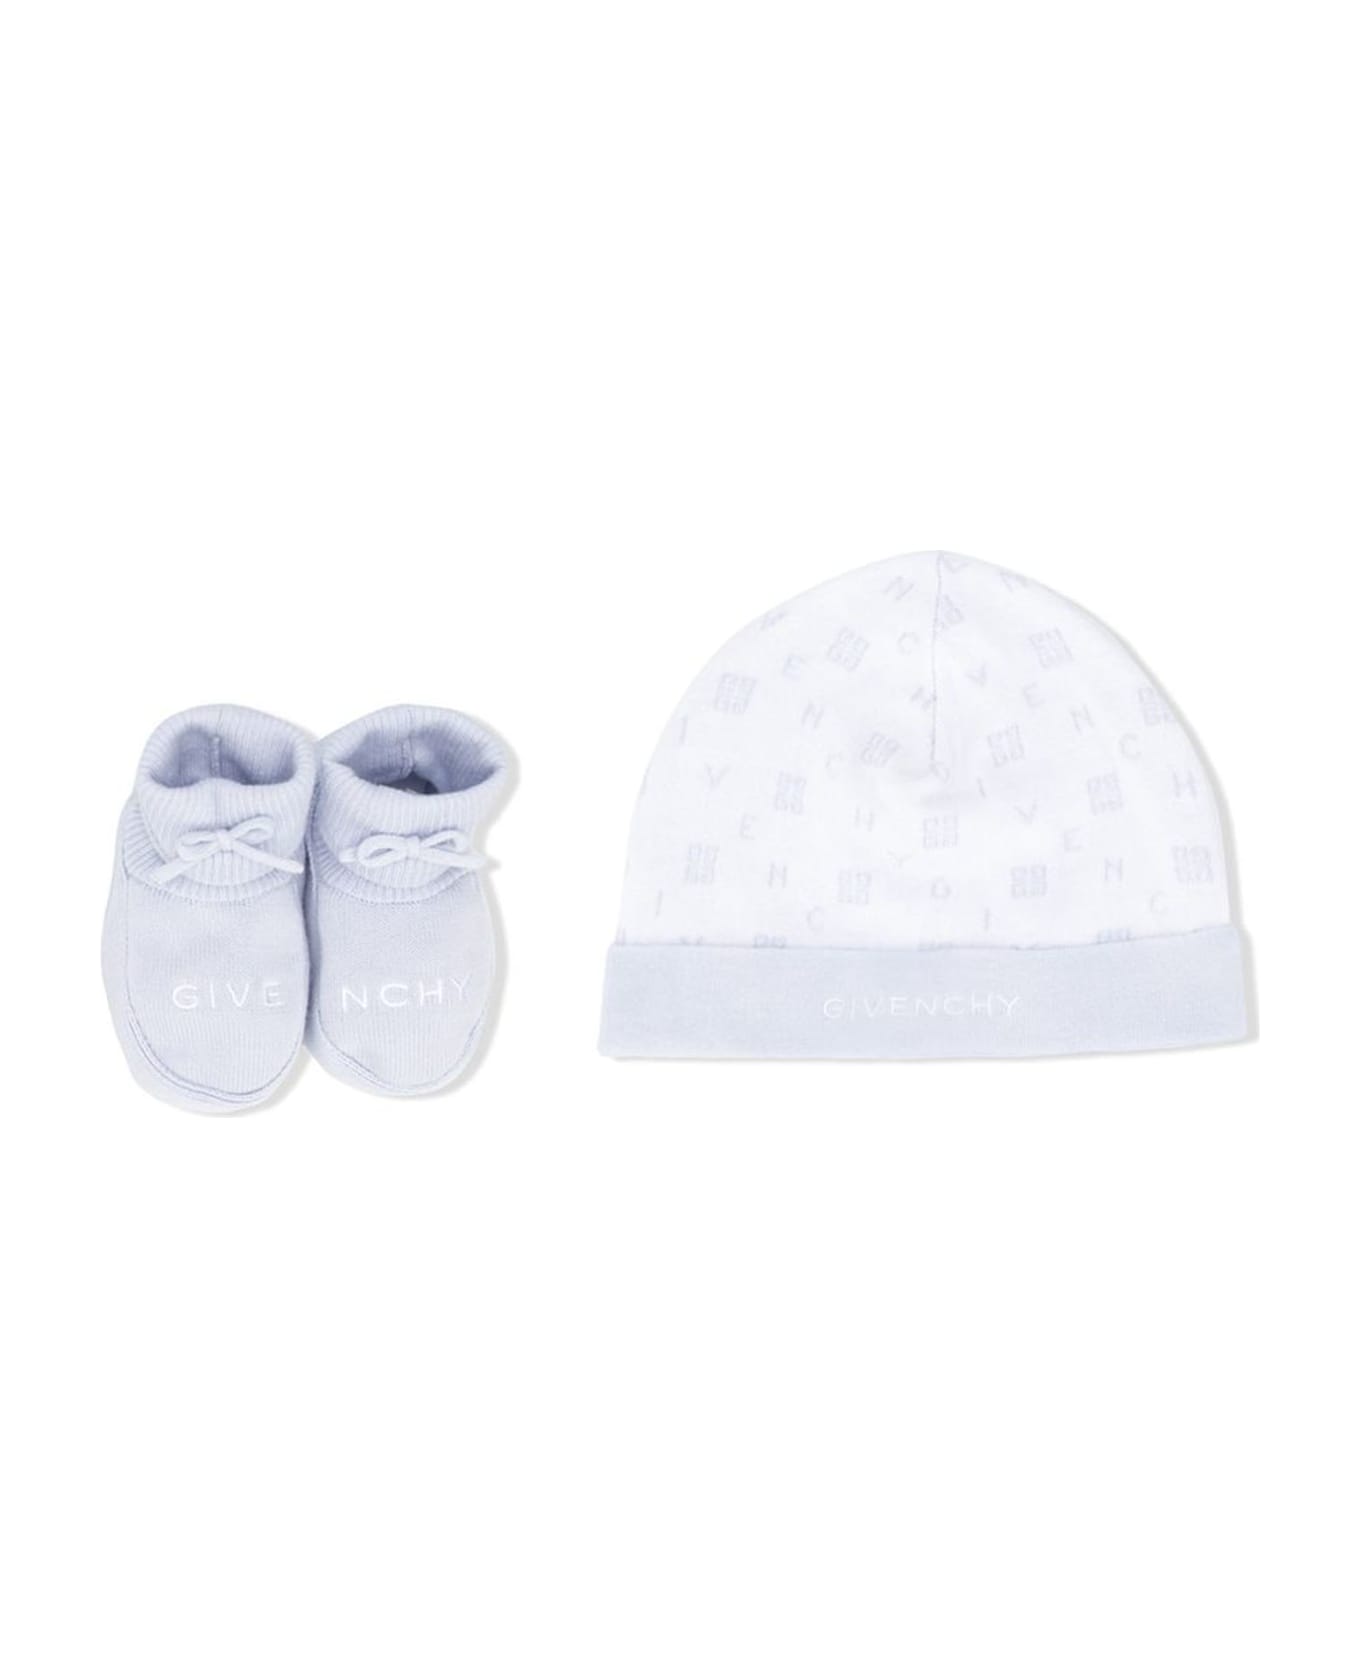 Givenchy Cotton Shoes And Hat - Light blue アクセサリー＆ギフト